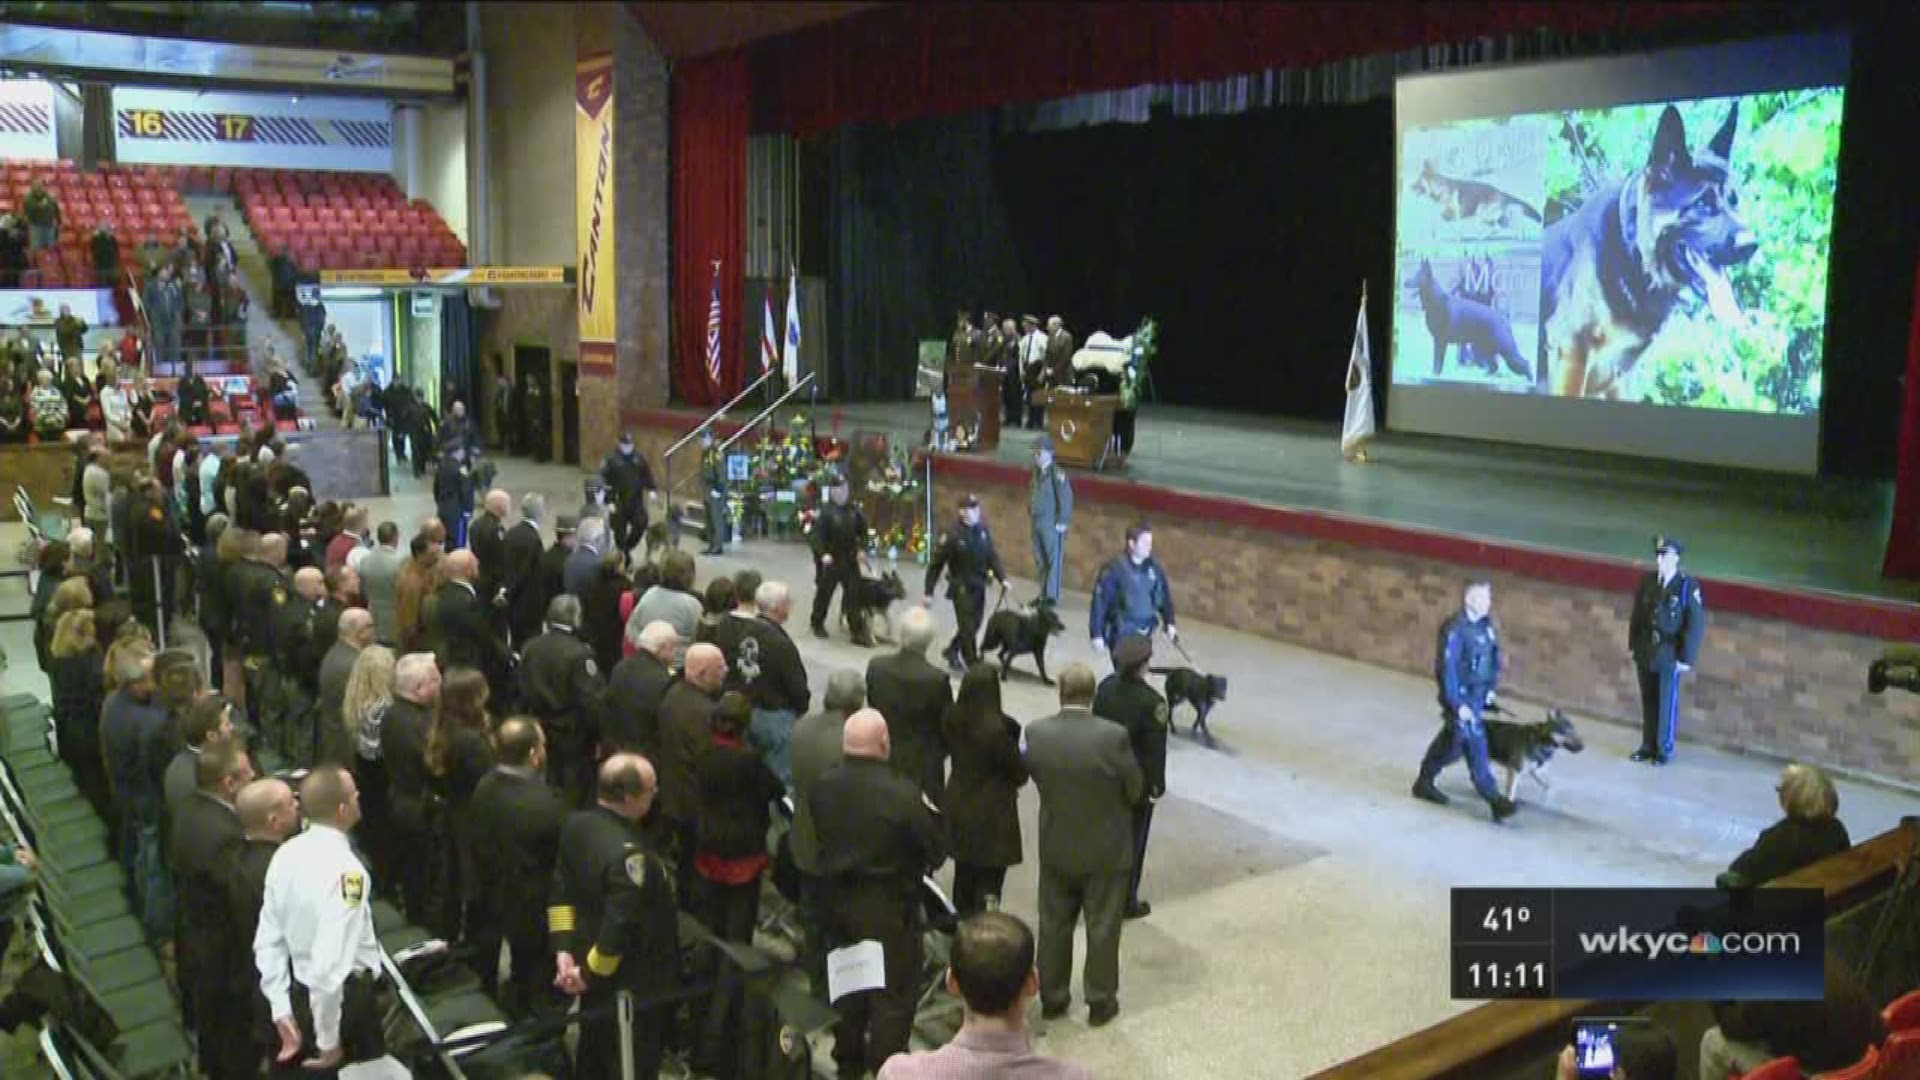 The Canton K-9 officer killed in the line of duty would have turned 3 today. Instead, today was a ceremony of his life.